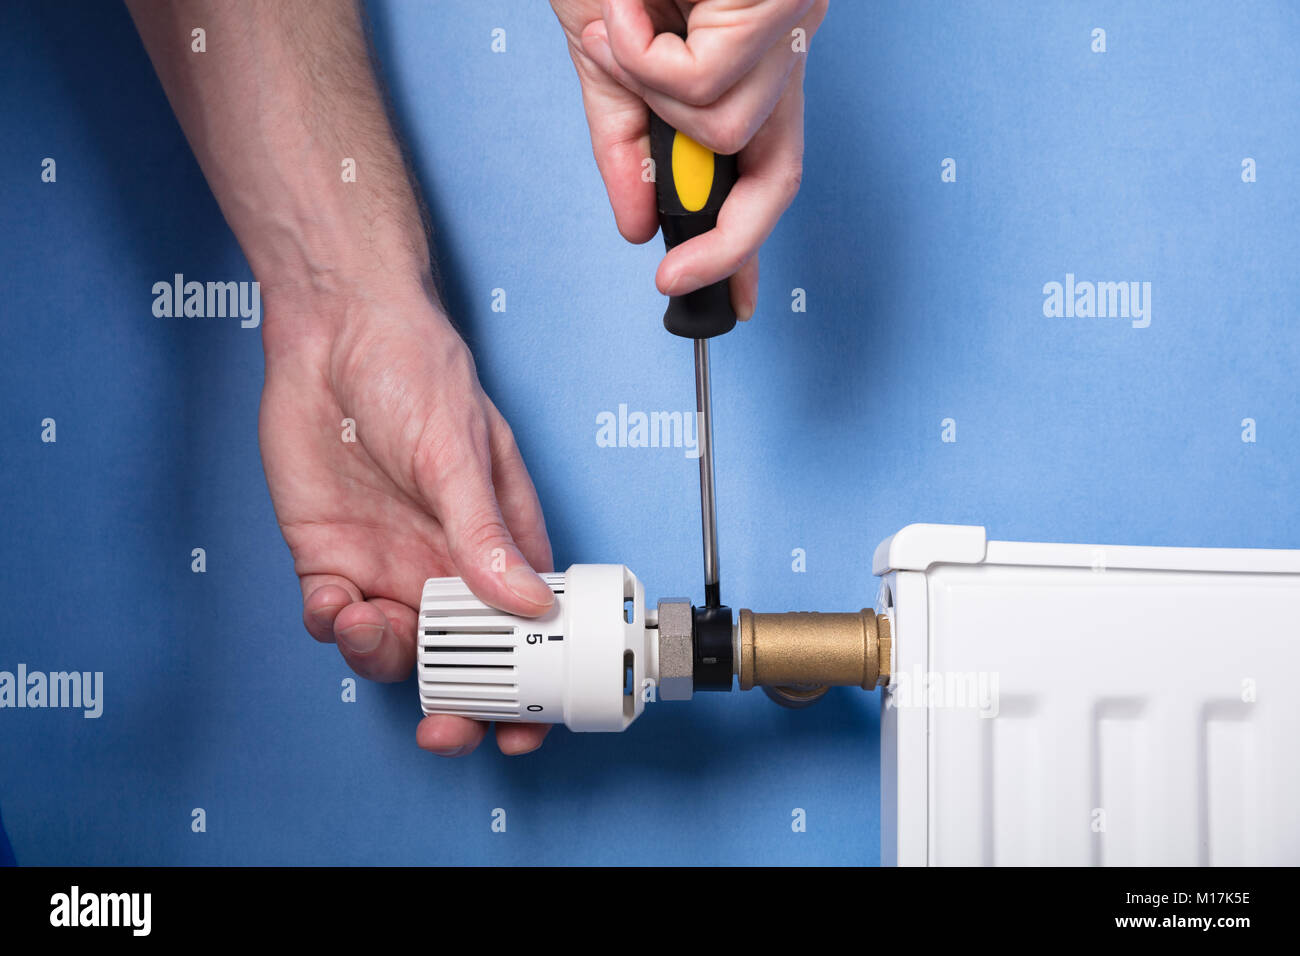 Close-up Of A Human Hand Installing Radiator With Screwdriver Stock Photo